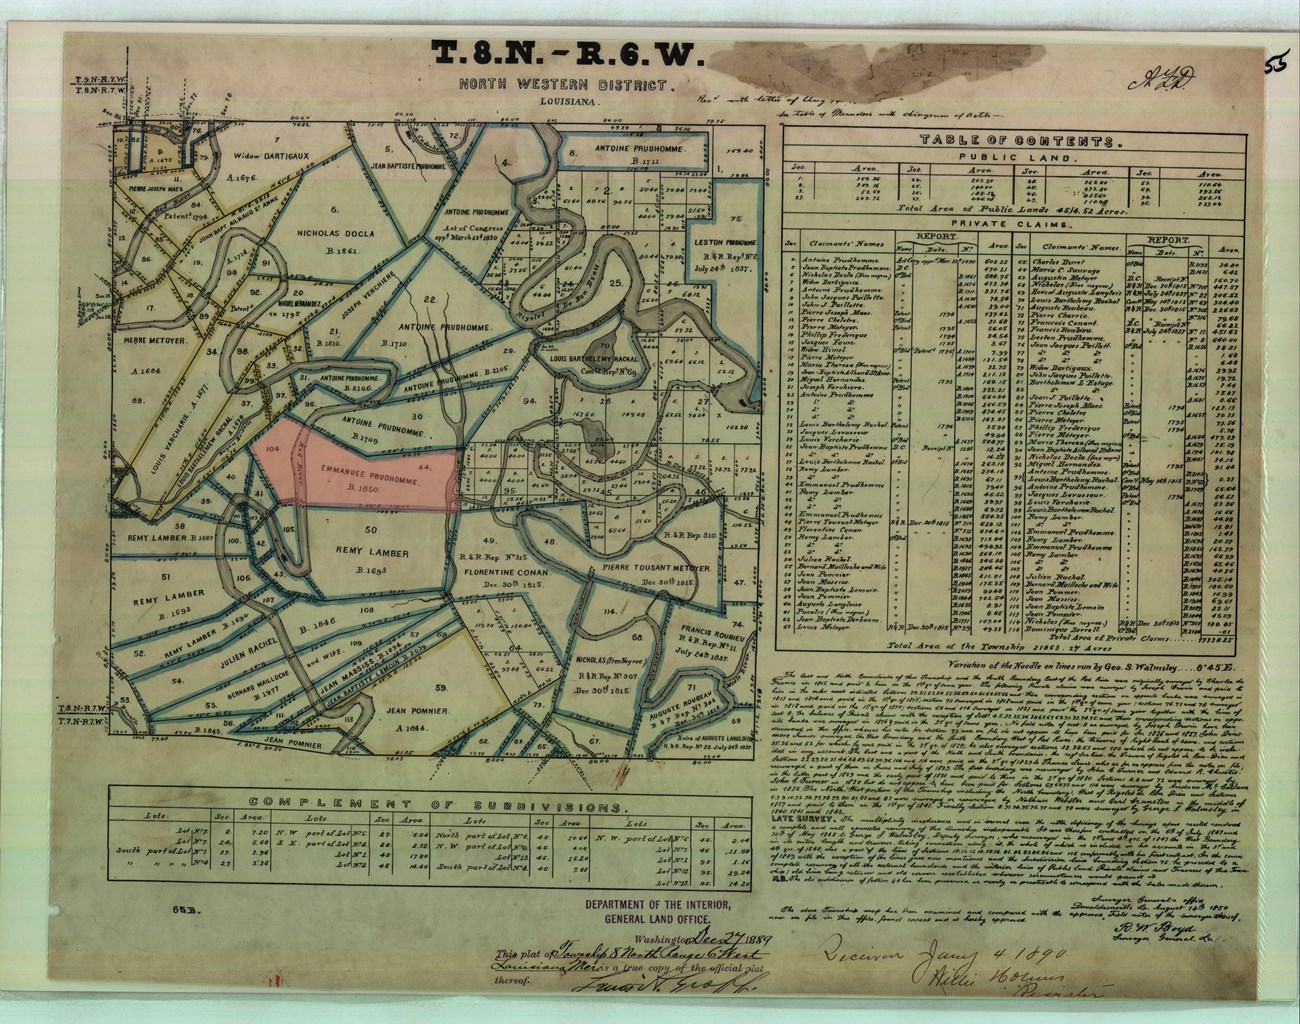 A plat map document for a district in Louisiana shows a subdivided map on one side and a table titled "Private Claims"